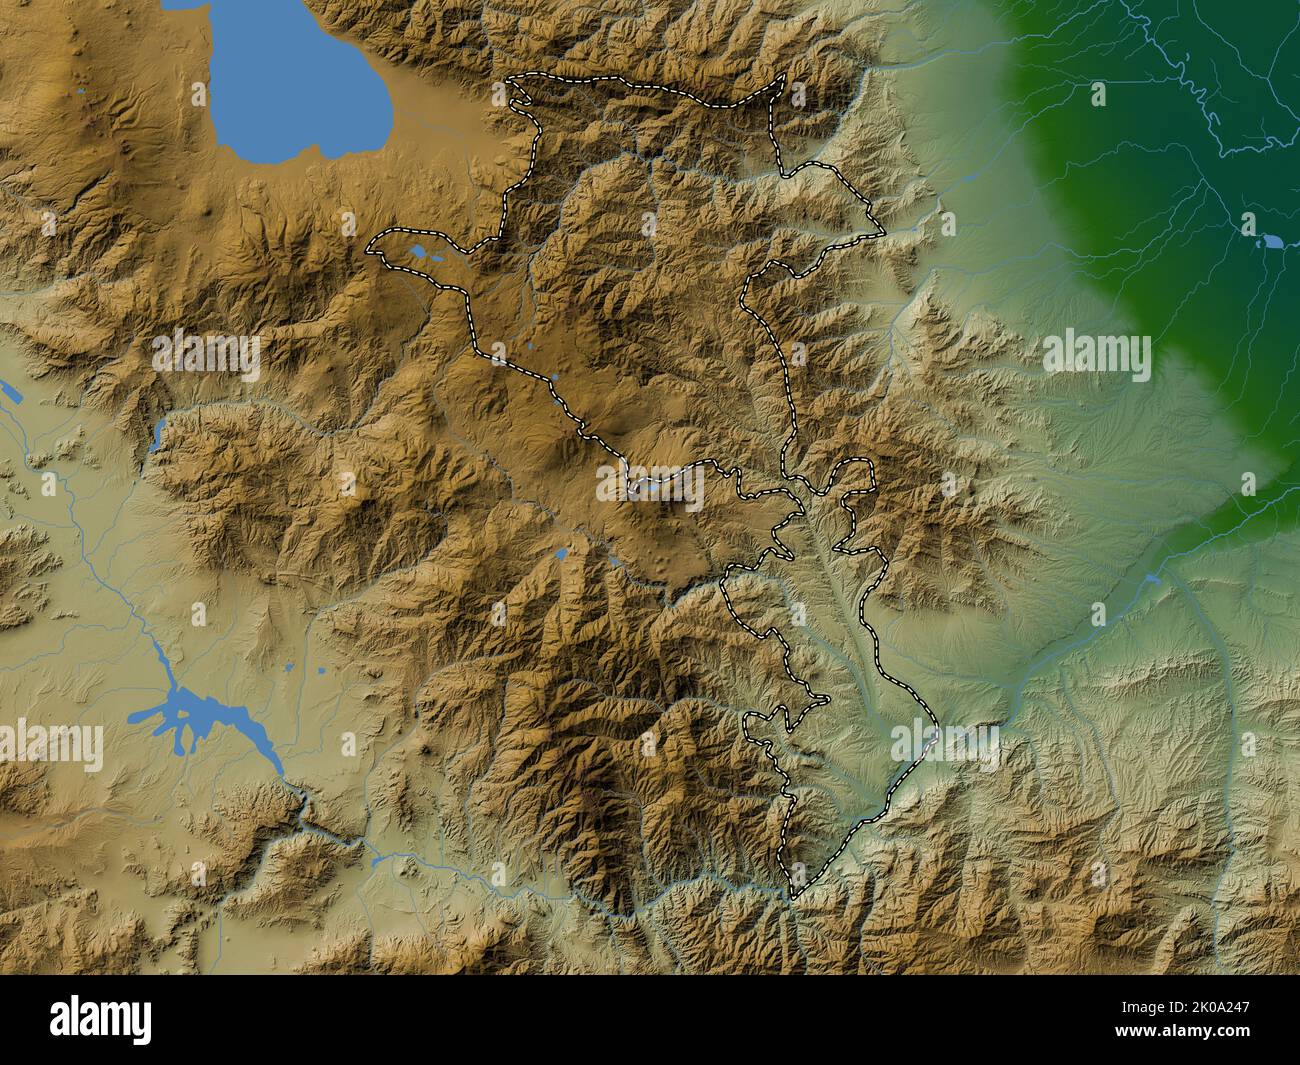 Kalbajar-Lachin, region of Azerbaijan. Colored elevation map with lakes and rivers Stock Photo